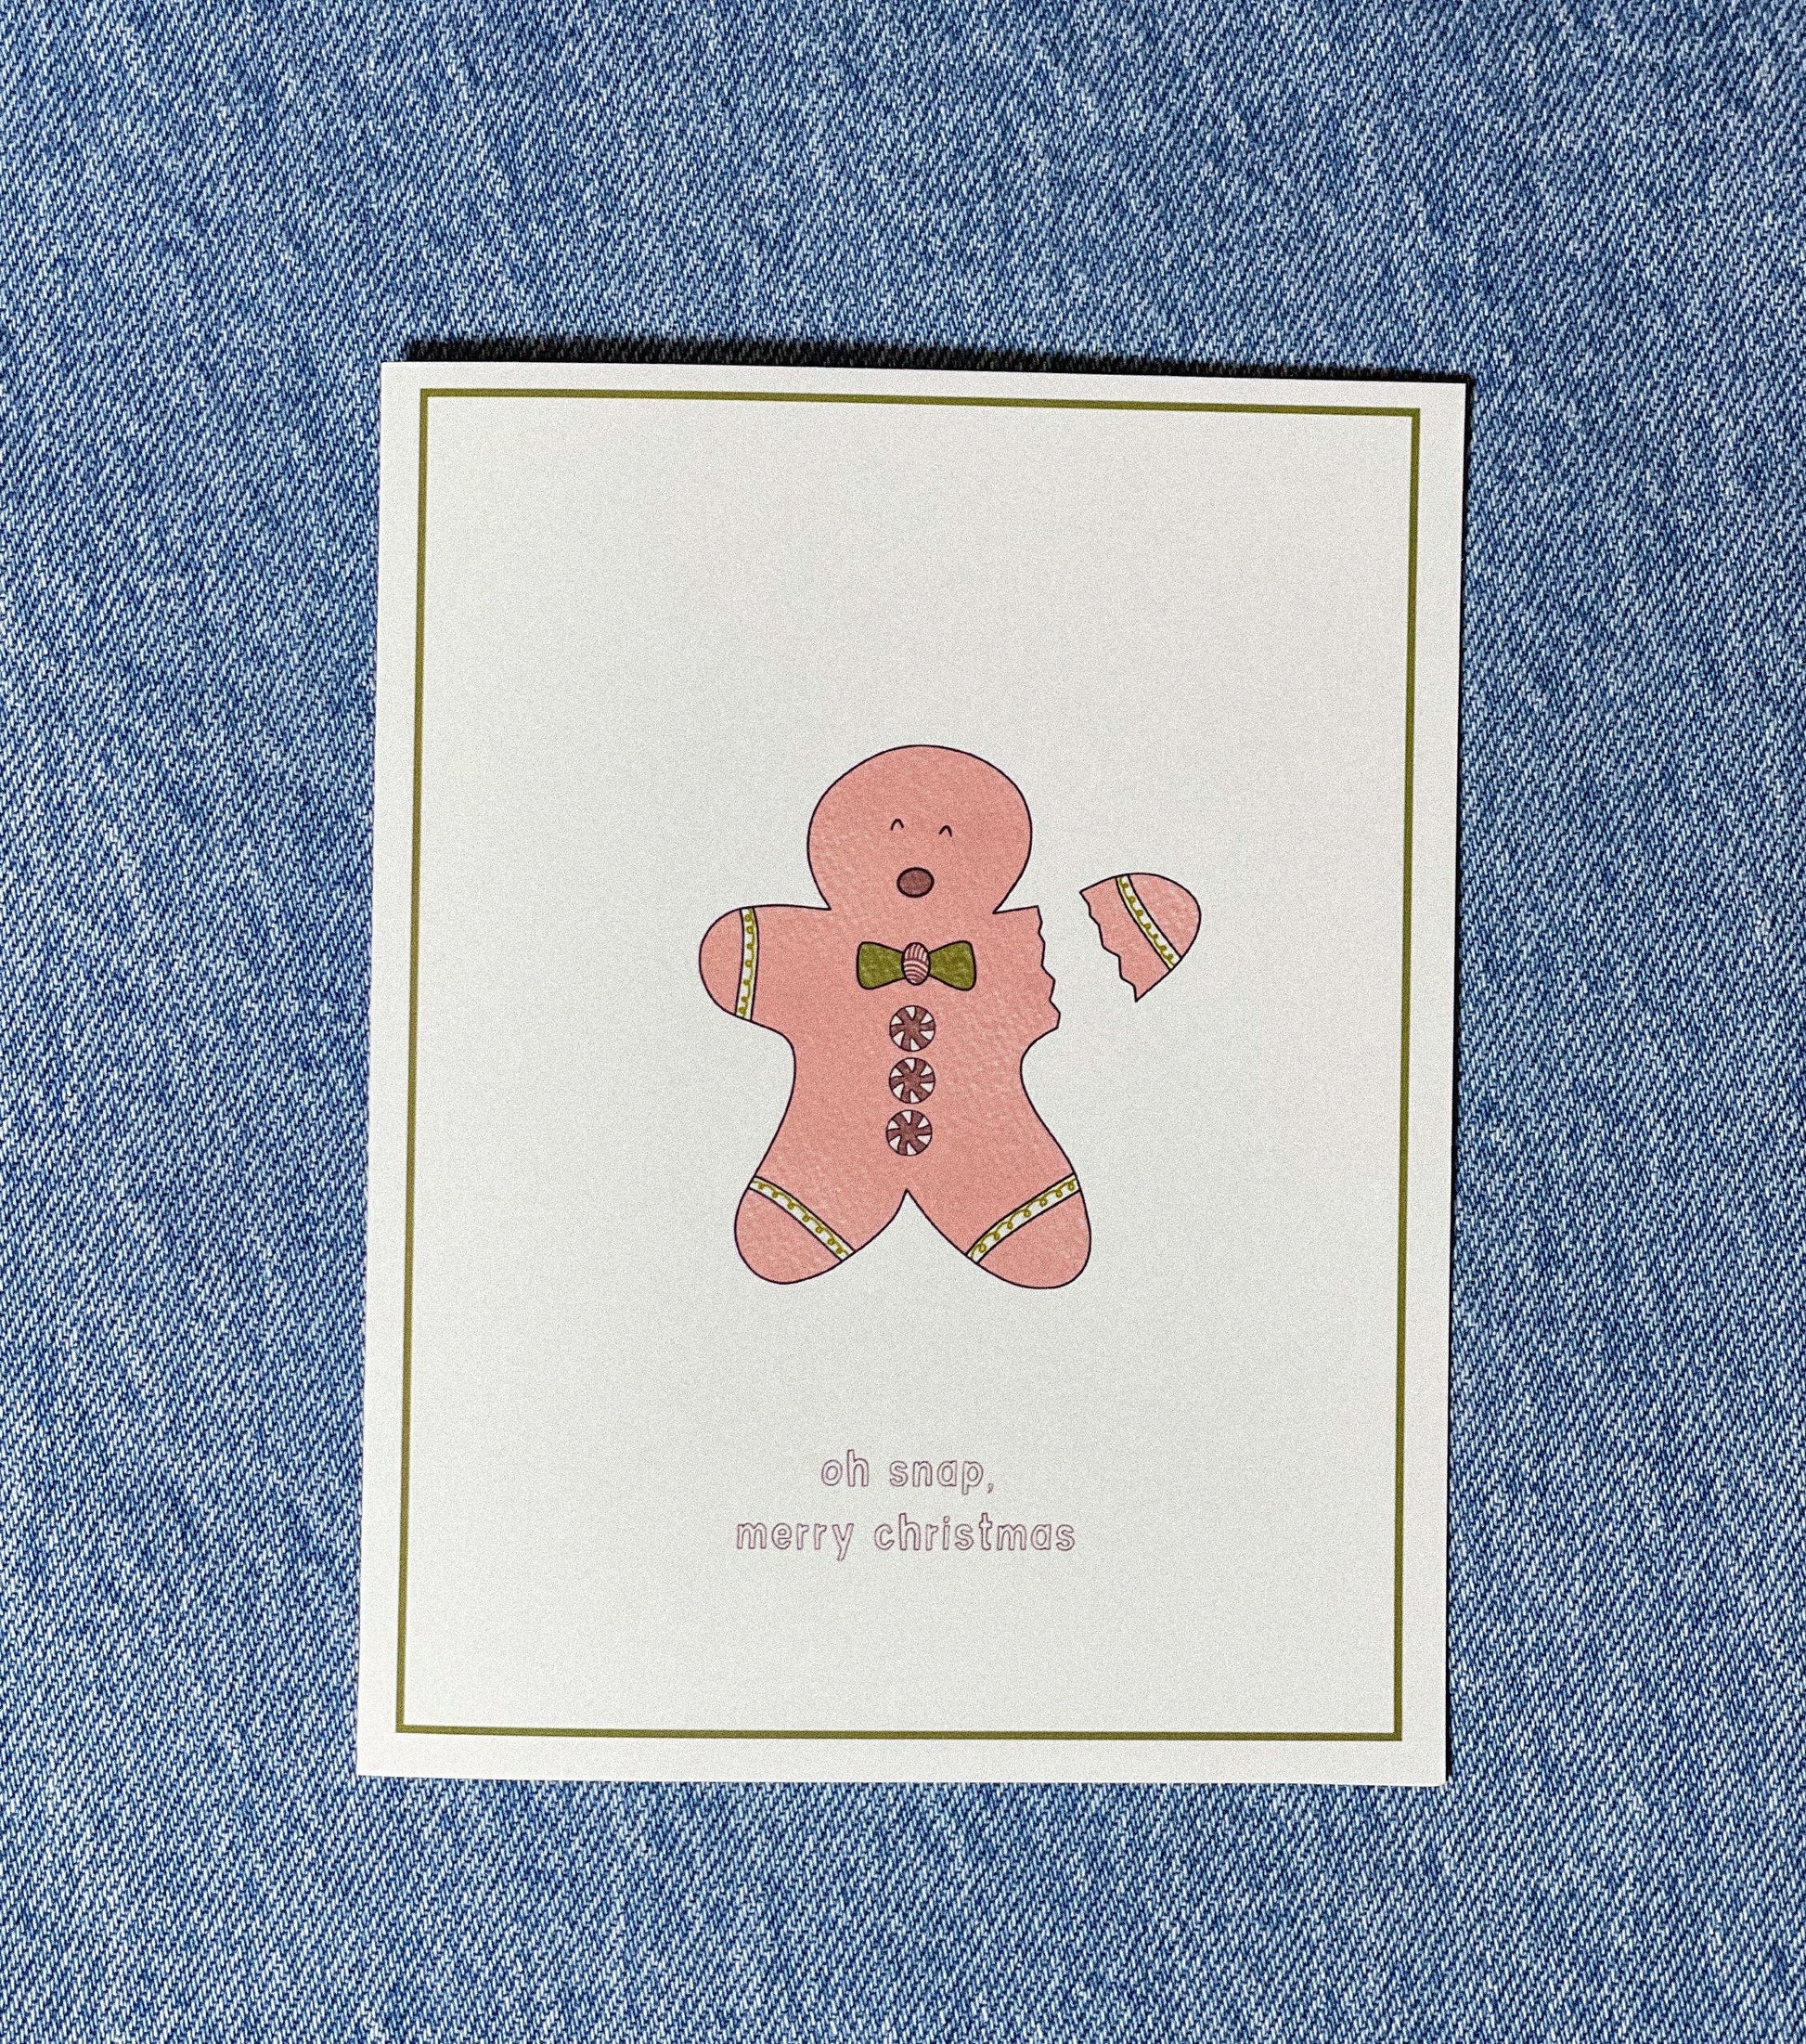 white greeting card with a green border and a little pink gingerbread man with his arm snapping off and the text saying "oh snap, merry christmas